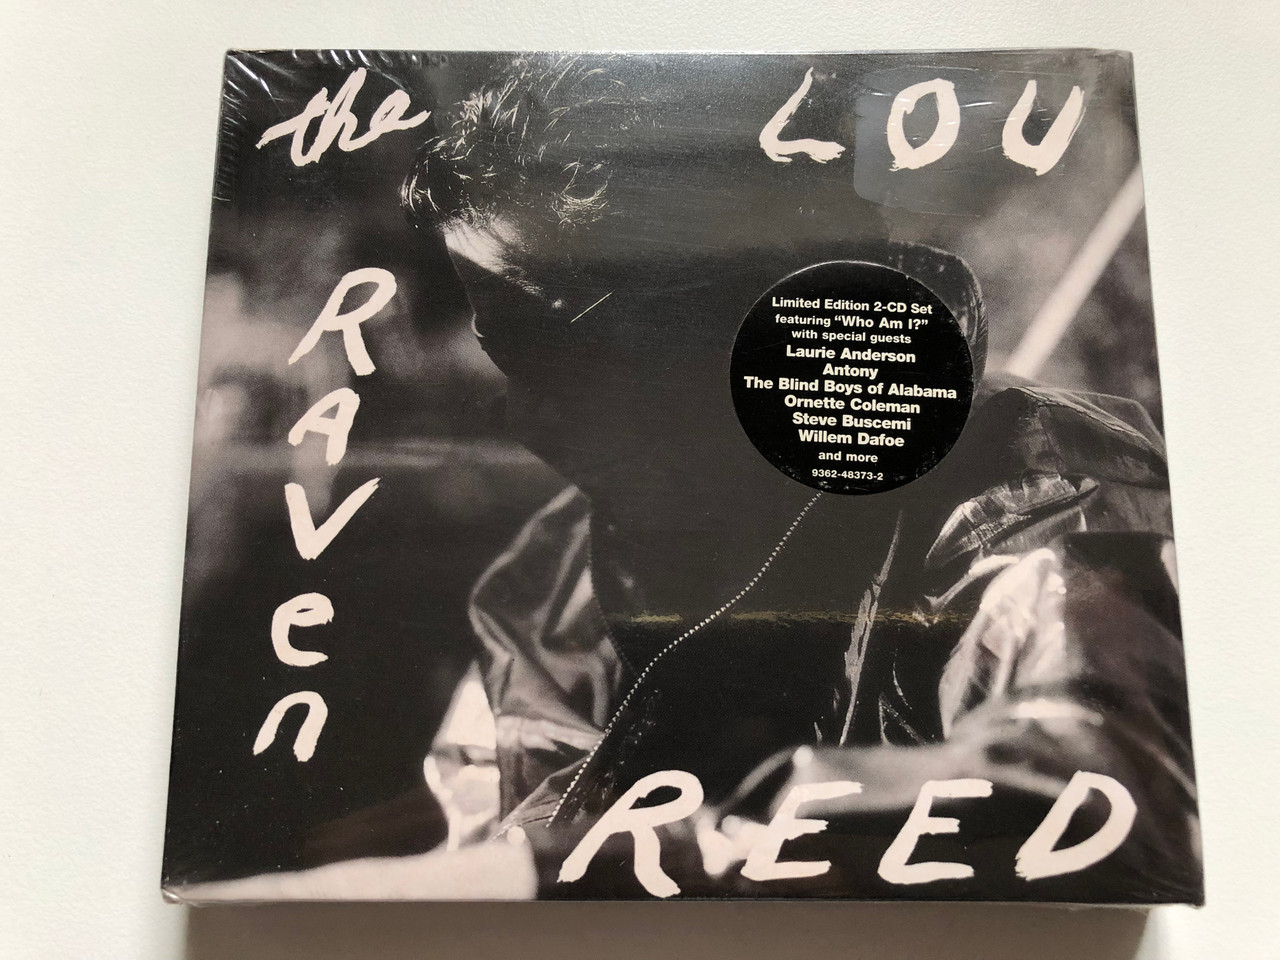 https://cdn10.bigcommerce.com/s-62bdpkt7pb/products/0/images/240747/Lou_Reed_The_Raven_Limited_Edition_2-CD_Set_featuring_Who_Am_I_with_special_guests_Laurie_Anderson_Antony_The_Blind_Boys_of_Alabama_Ornette_Coleman_Steve_Buscemi_Sire_2x_Audio_CD_1__45601.1658315815.1280.1280.JPG?c=2&_gl=1*oi1fw5*_ga*MjA2NTIxMjE2MC4xNTkwNTEyNTMy*_ga_WS2VZYPC6G*MTY1ODMxNDU5Ni40OTAuMS4xNjU4MzE1ODE4LjYw